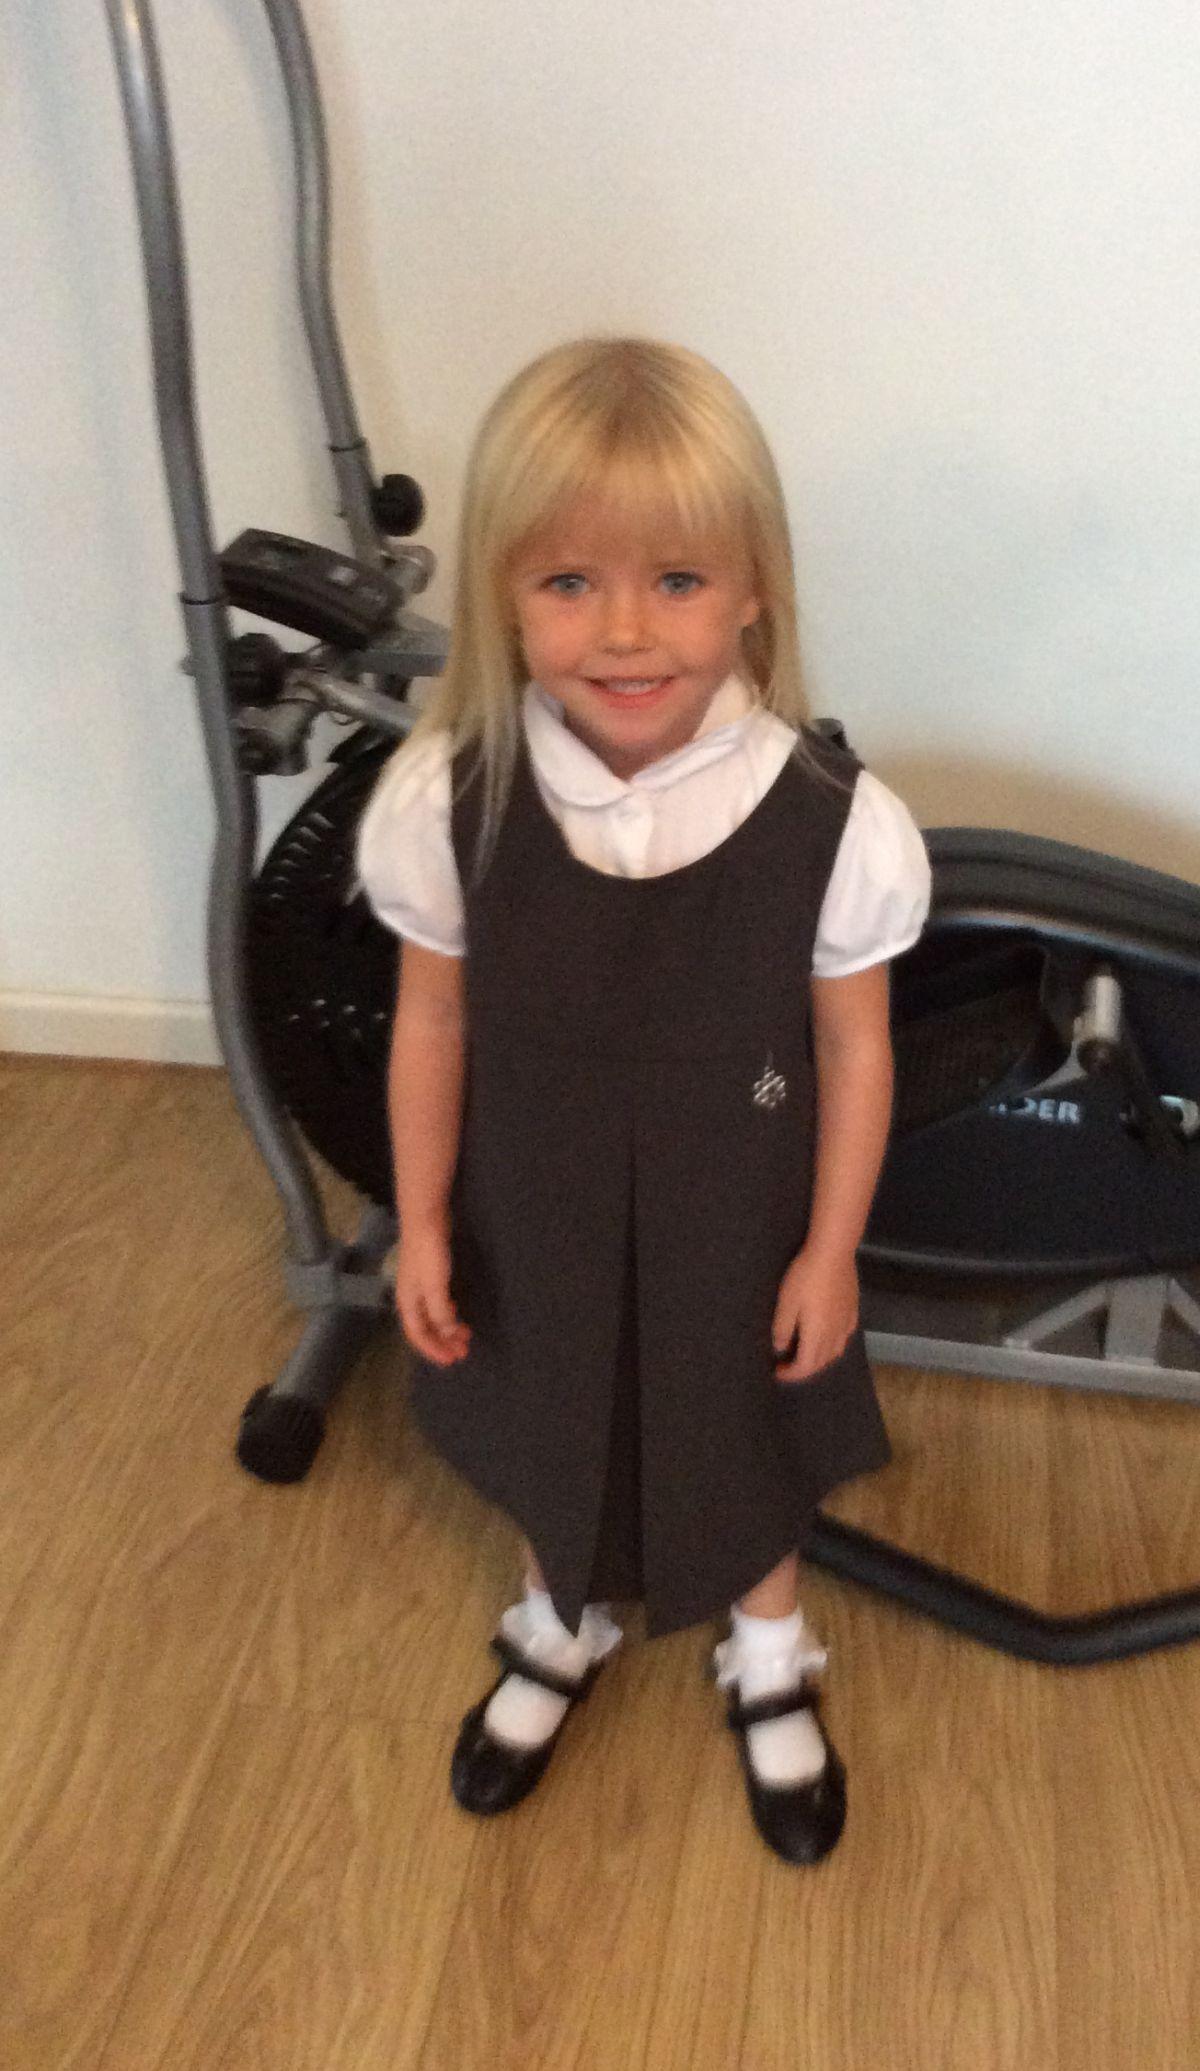 Back to School - Keeley Ross on her first day at school-  Picture by Lisa Dunn 